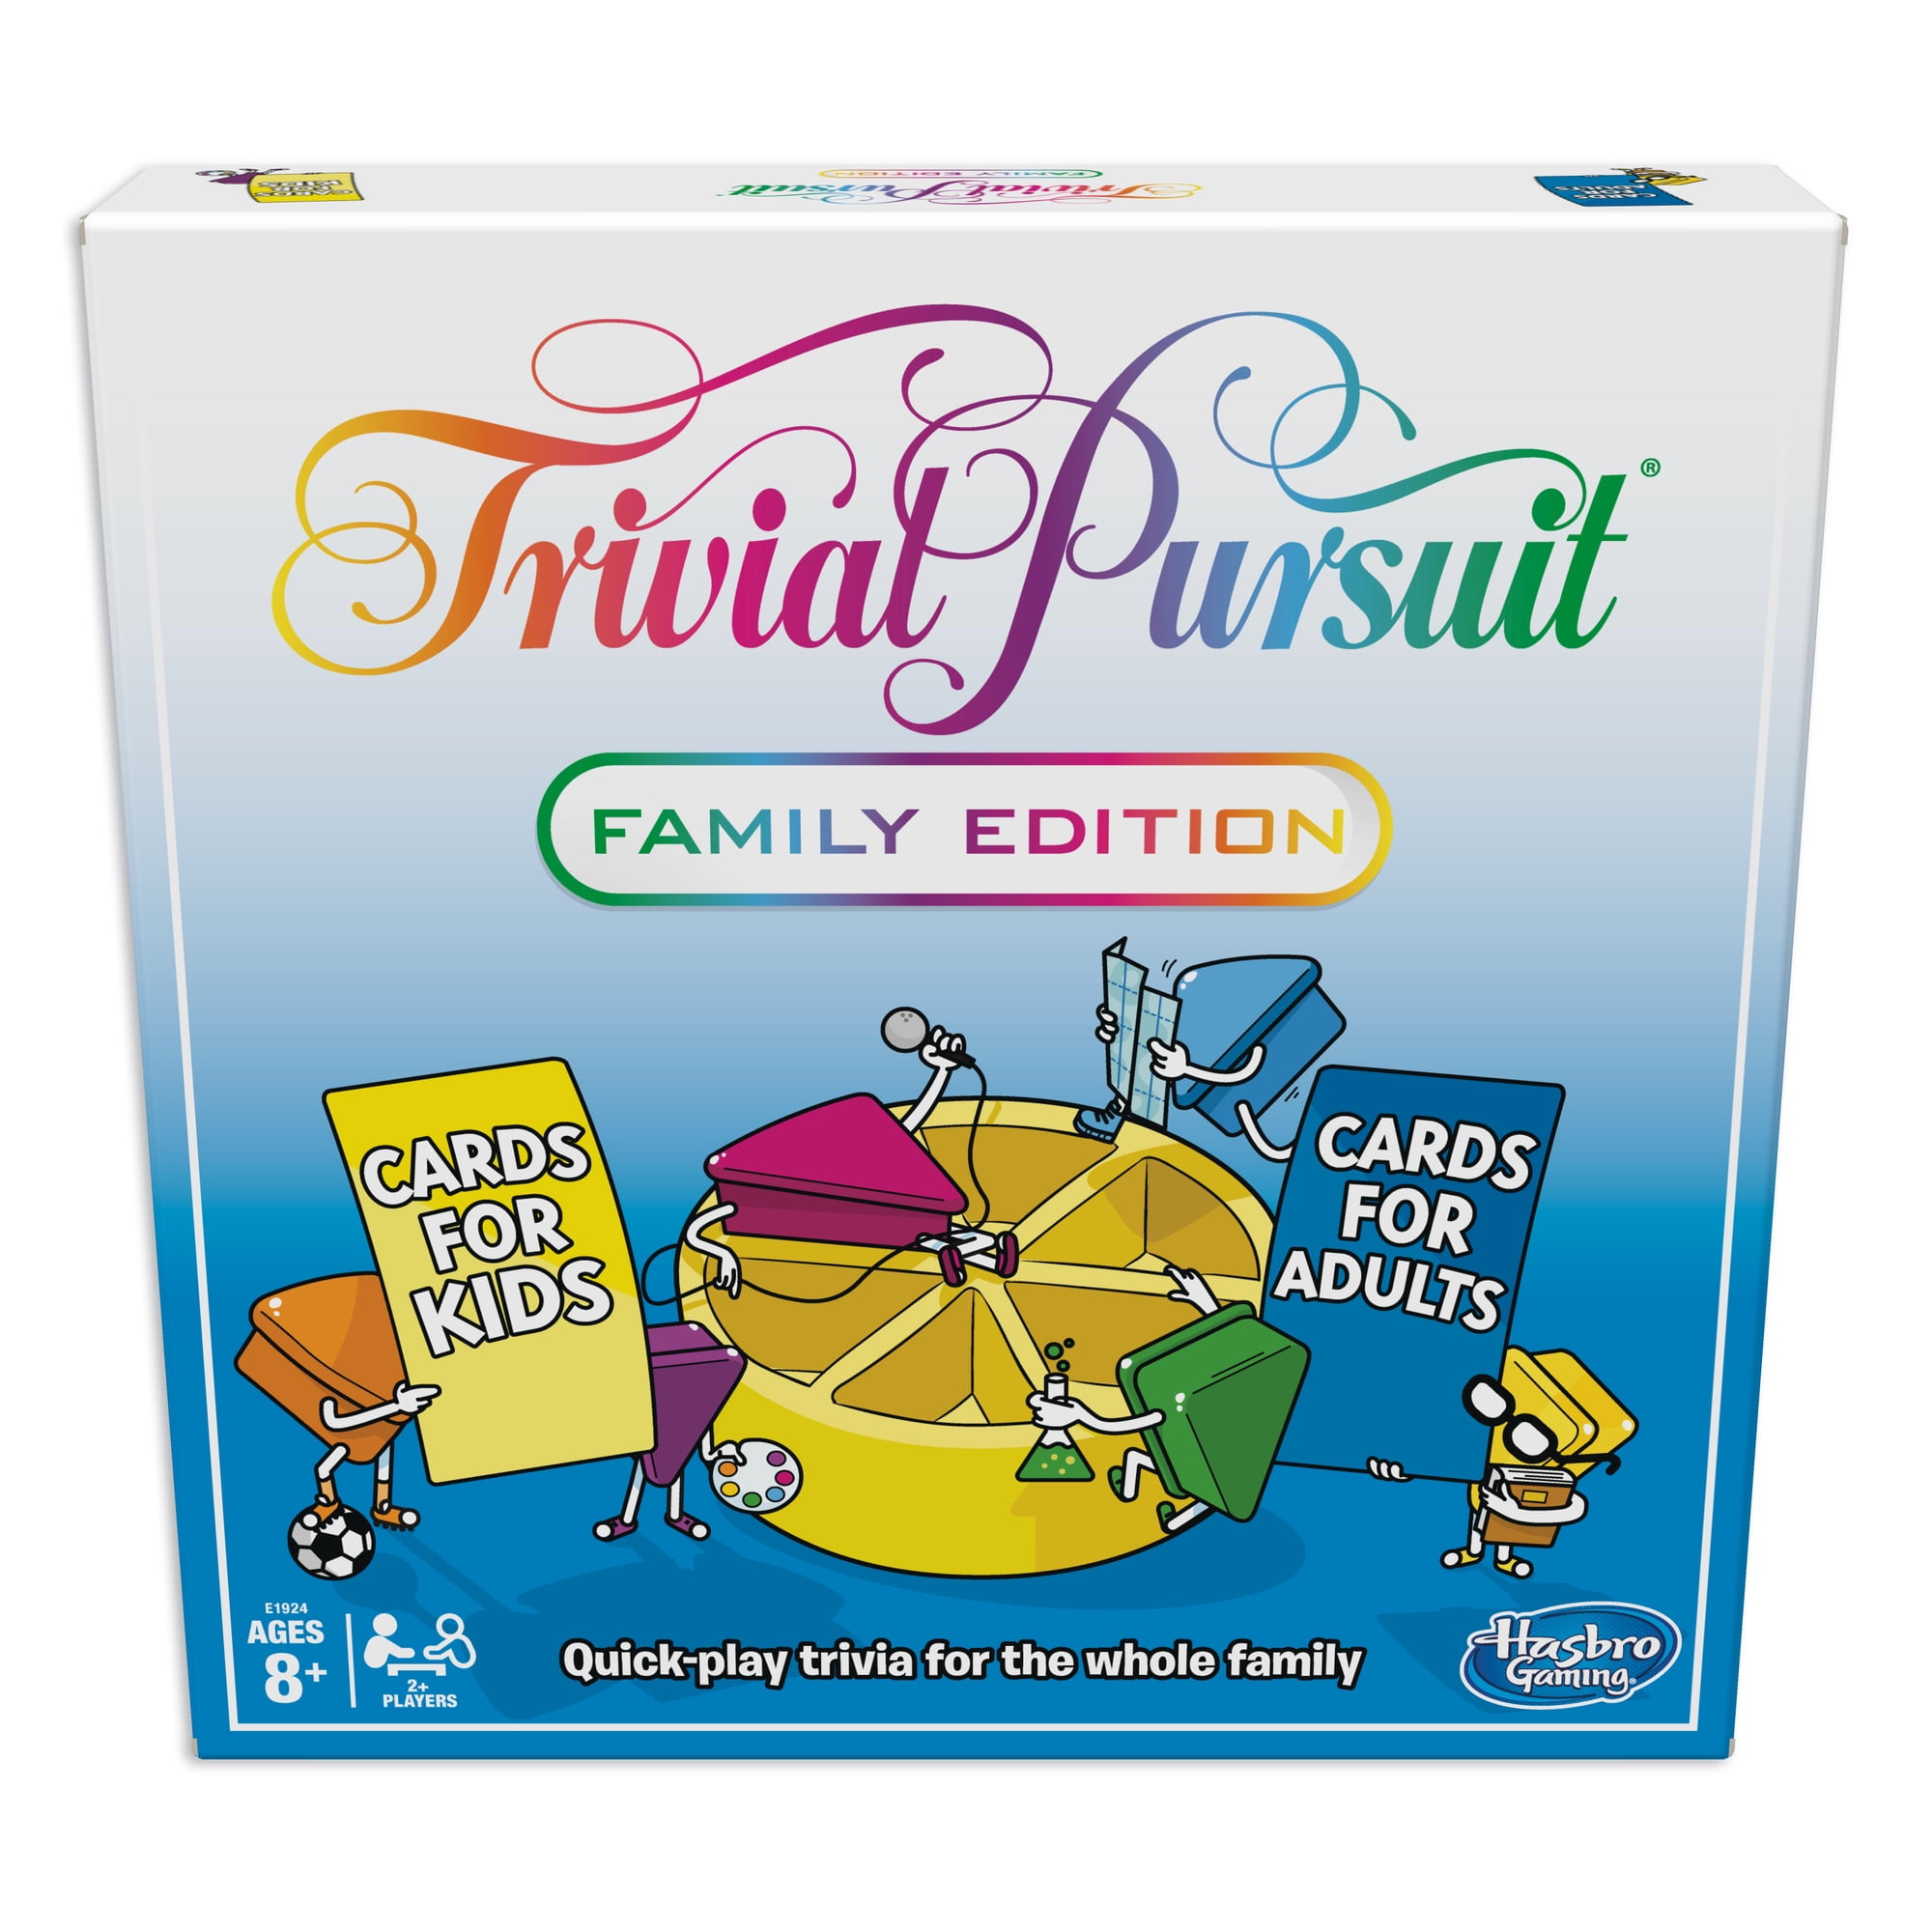 GAMES TRIVAL PURSUIT FAMILY EDITION BOARD GAME 